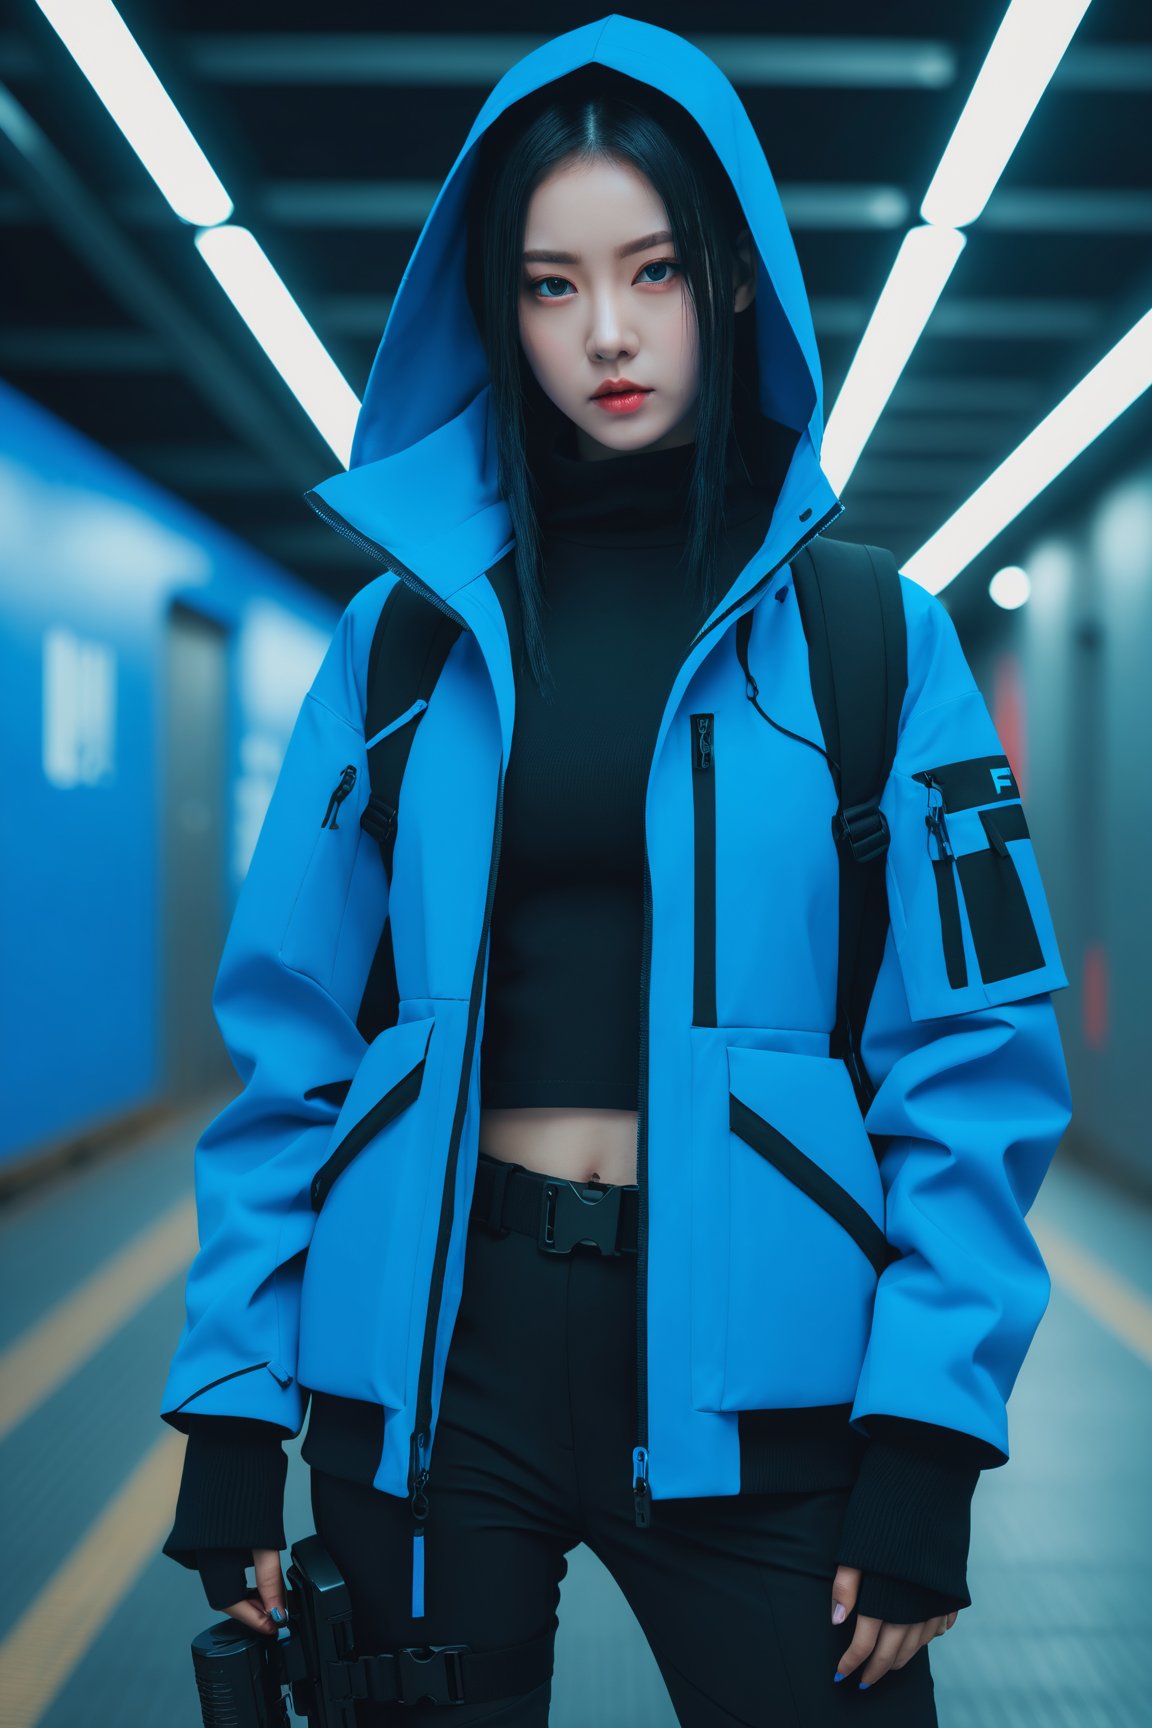 Techwear fashion a young woman, looking at the camera, posing, ulzzang, naver fanpop, ffffound, streaming on twitch, character album cover, blues moment, style of Alessio Albi, daily wear, moody lighting, appropriate comparison of cold and warm, reality,  . Futuristic,  cyberpunk,  urban,  tactical,  sleek,  dark,  highly detailed